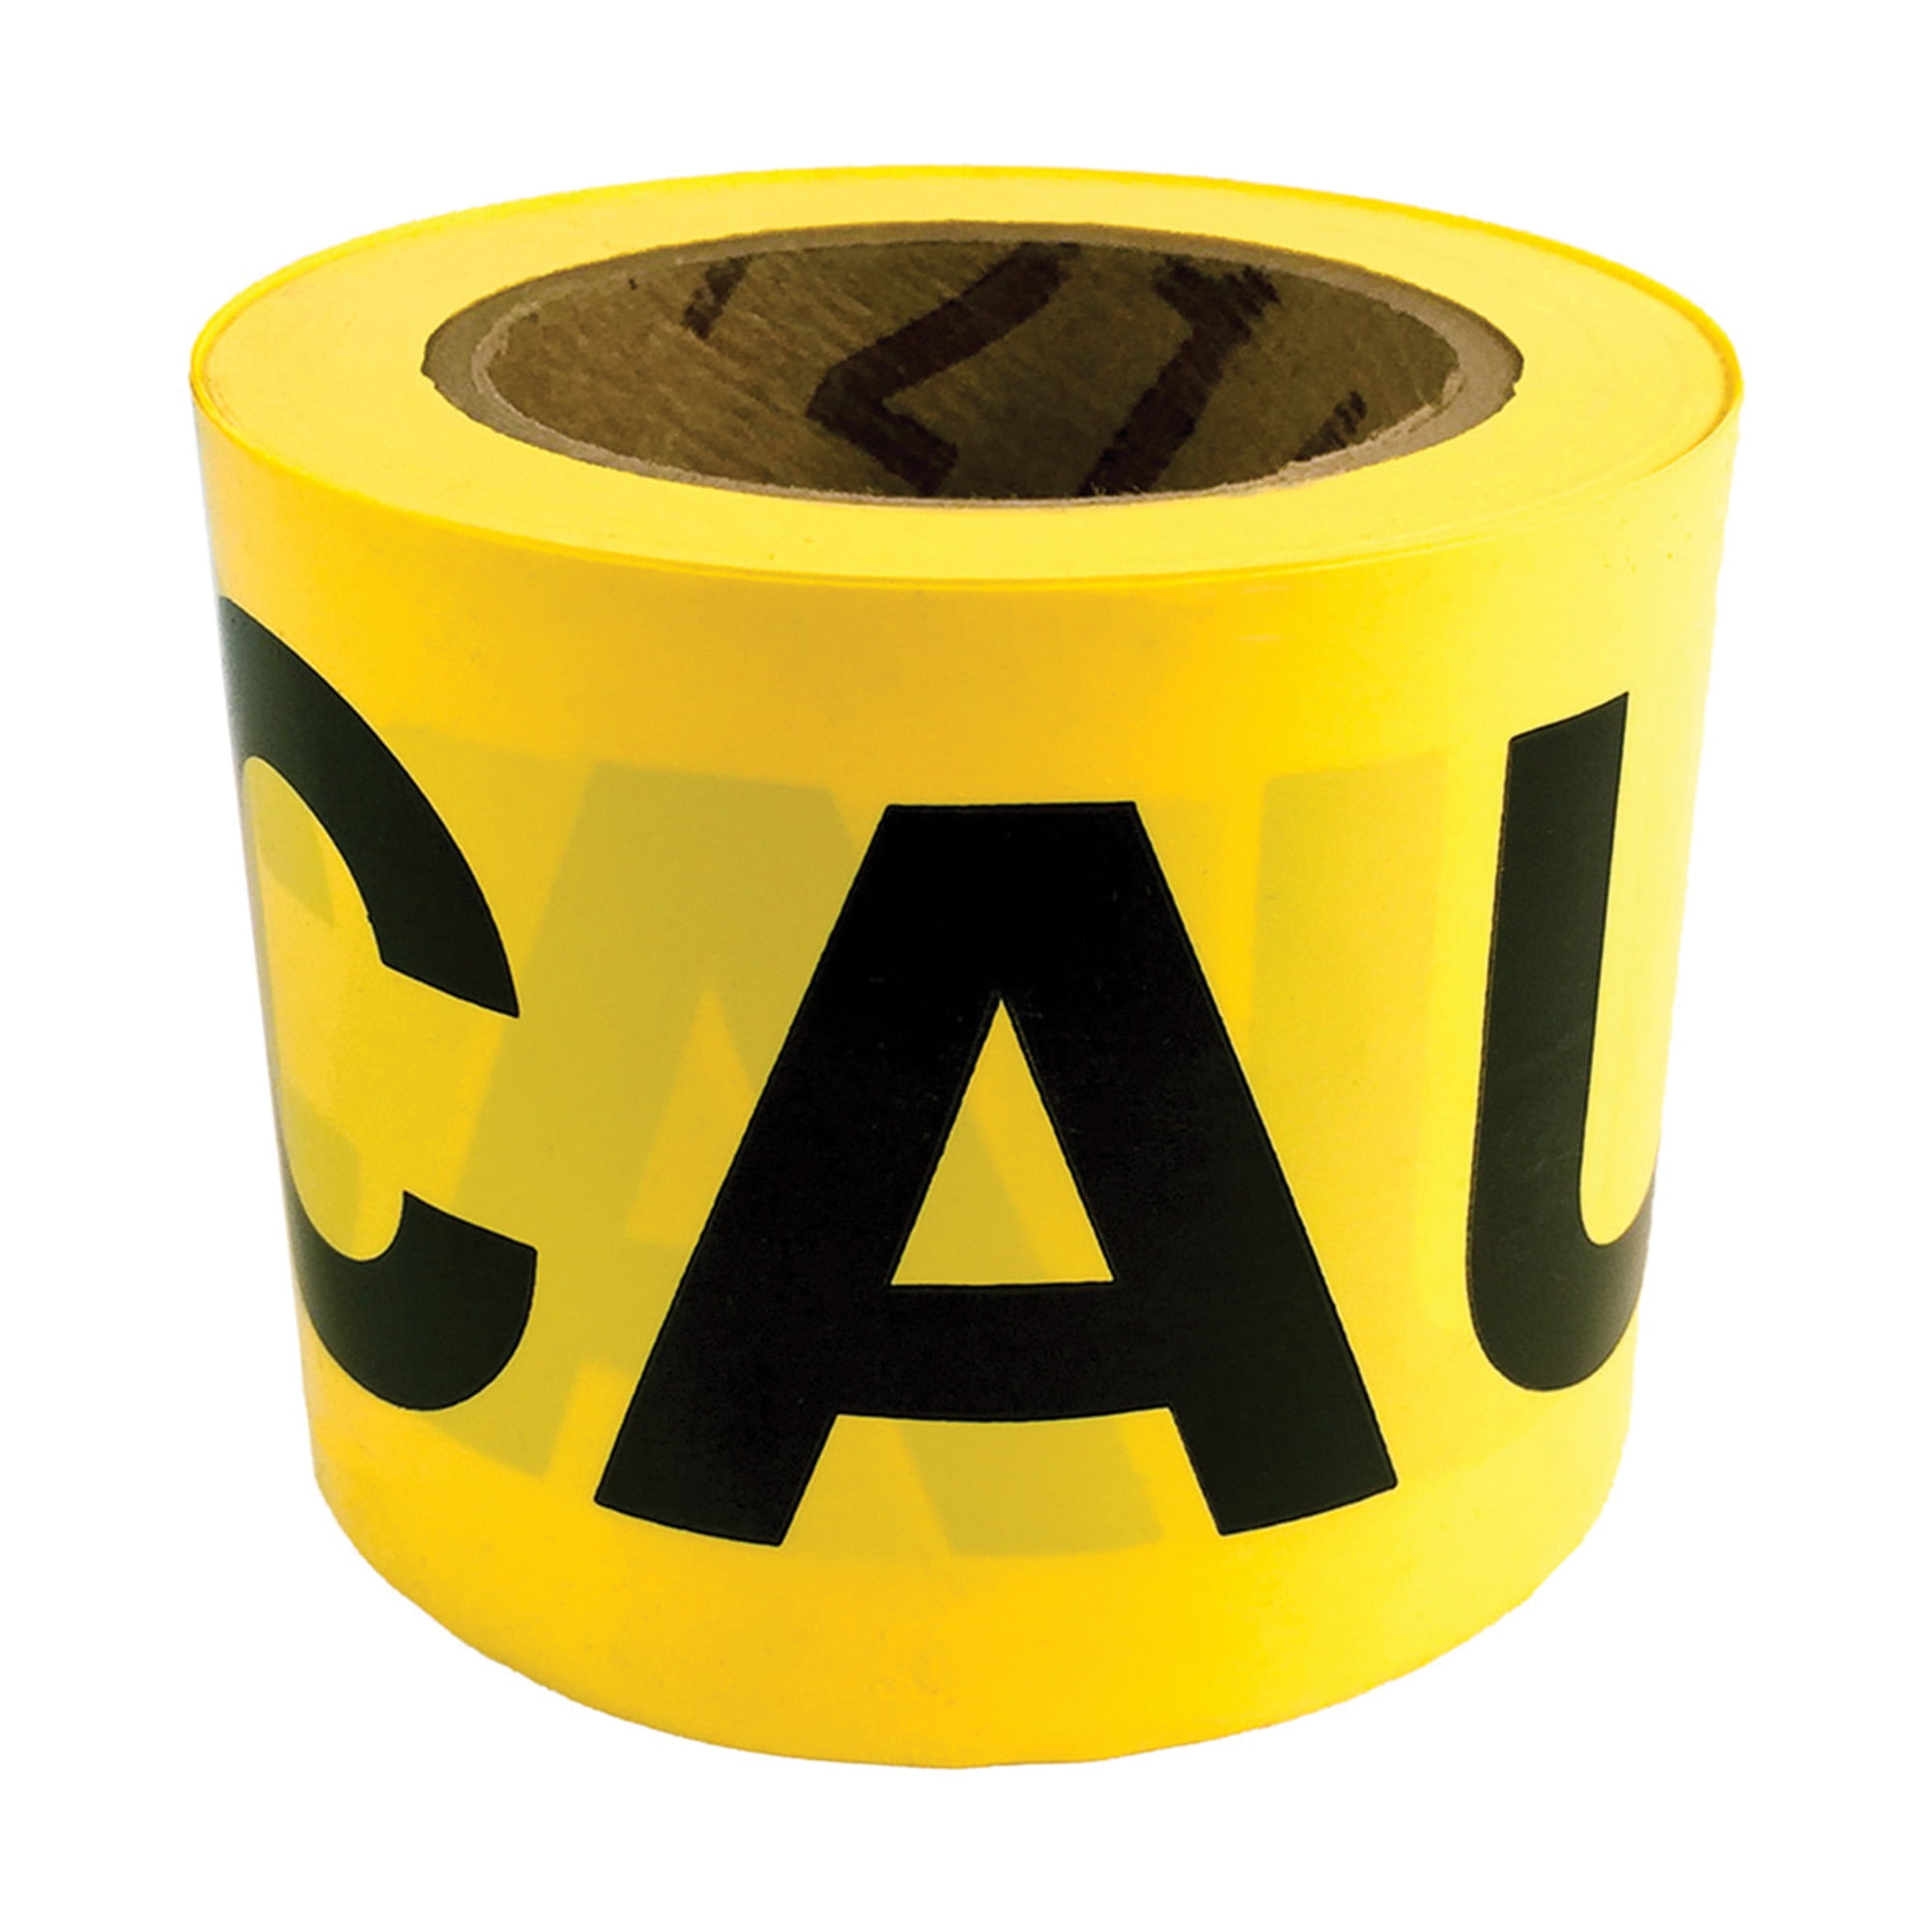 KINGPLAST Safety Warning Tape 3-Inch 300feet Non-Adhesive Black and Yellow Caution Tape Roll 